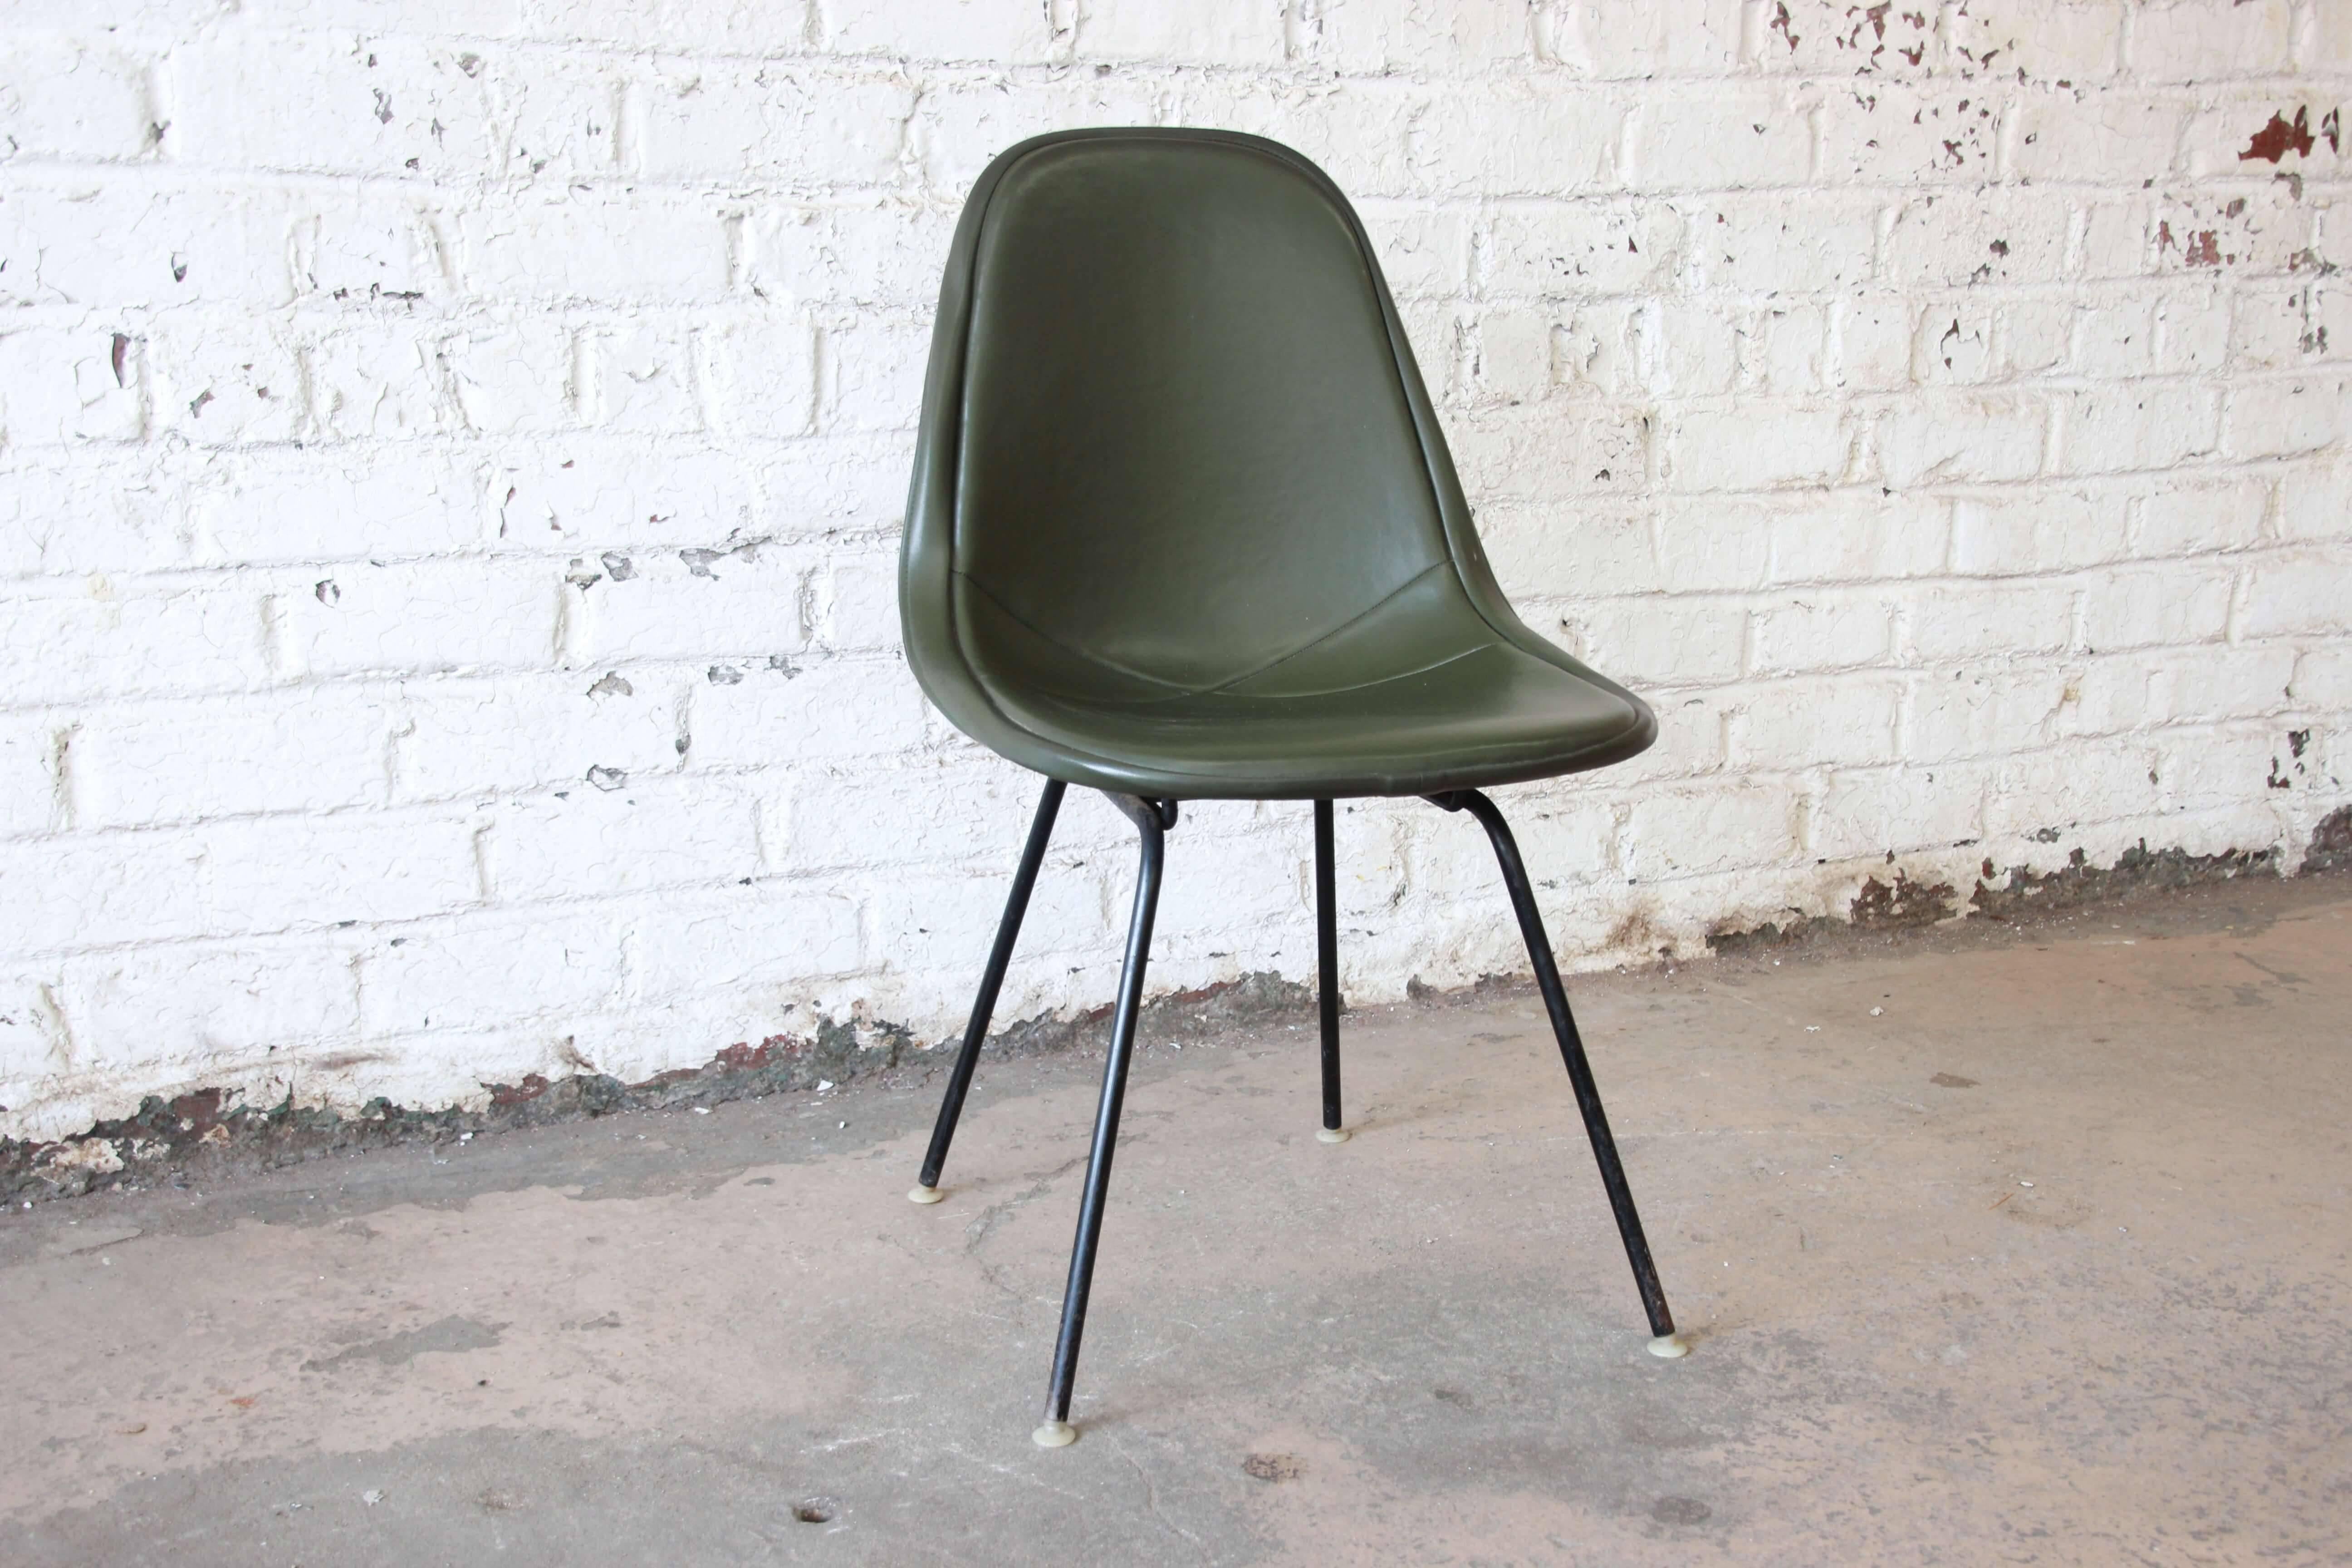 Offering a very nice original Ray and Charles Eames DKX-1 side chair in army green for Herman Miller. The chair features a wire frame and a comfortable cushioned upholstery. The chair is in good vintage condition with a minor nick in the upholstery